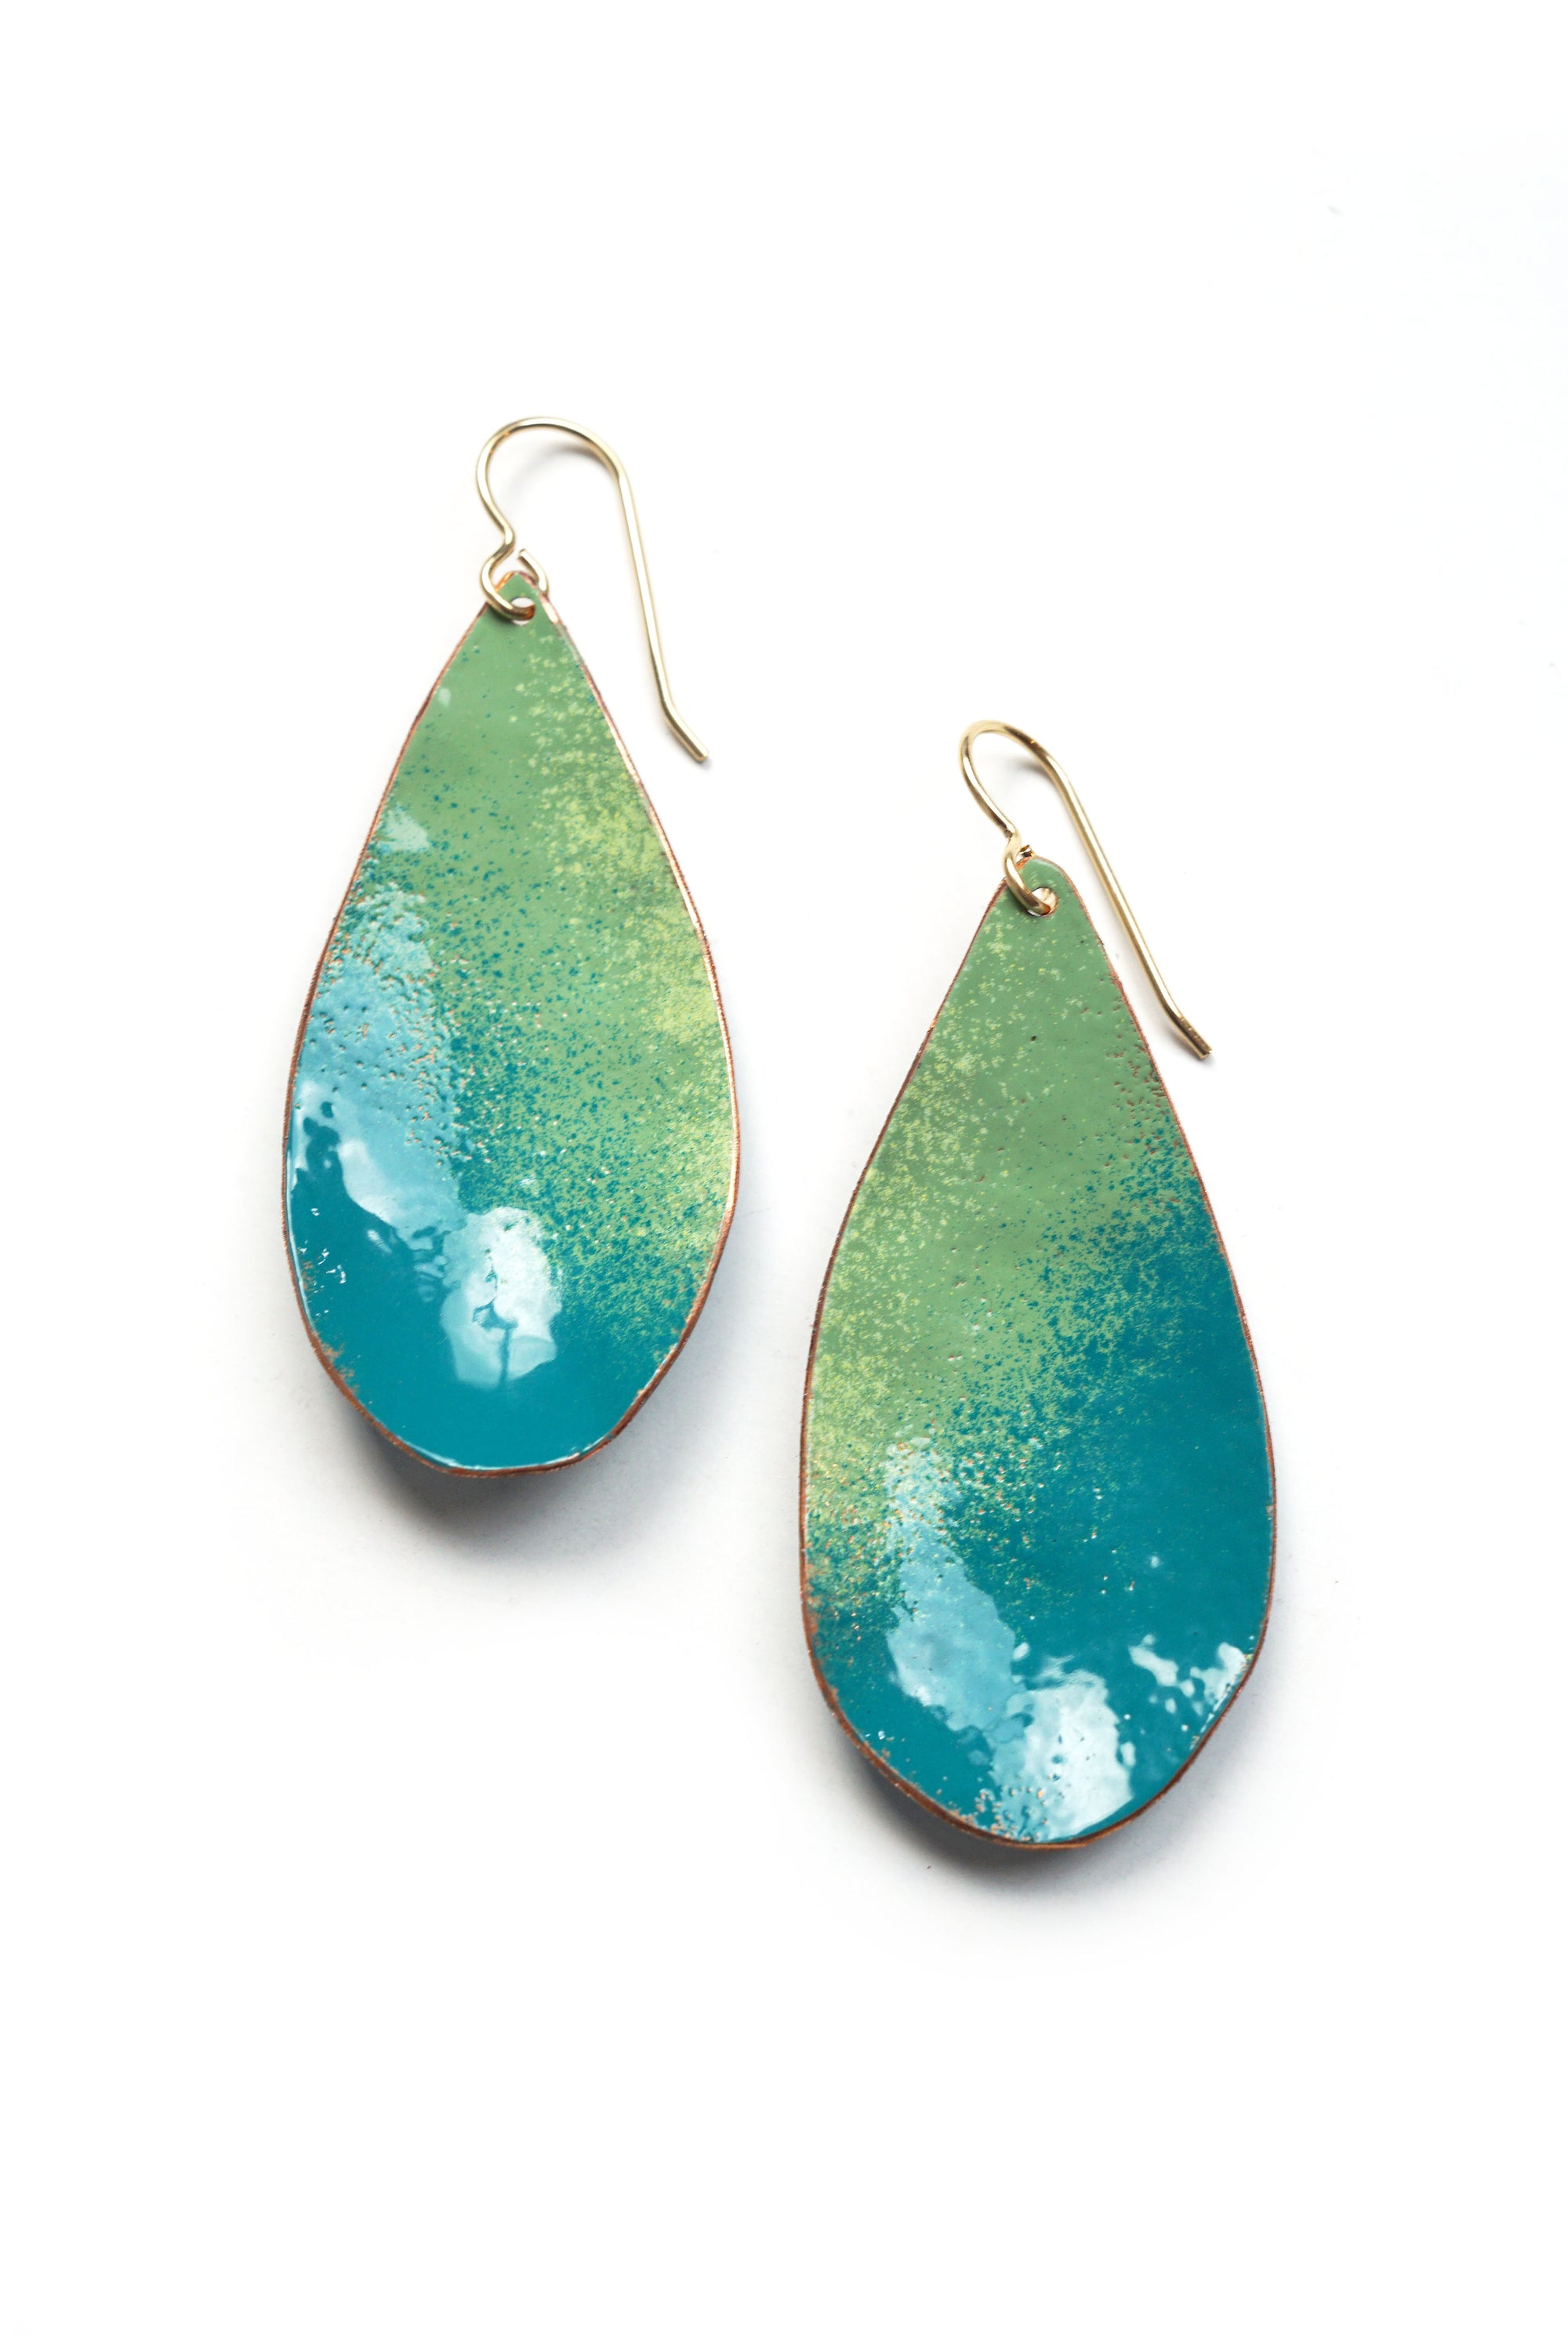 Chroma Earrings in Pale Green and Bold Teal